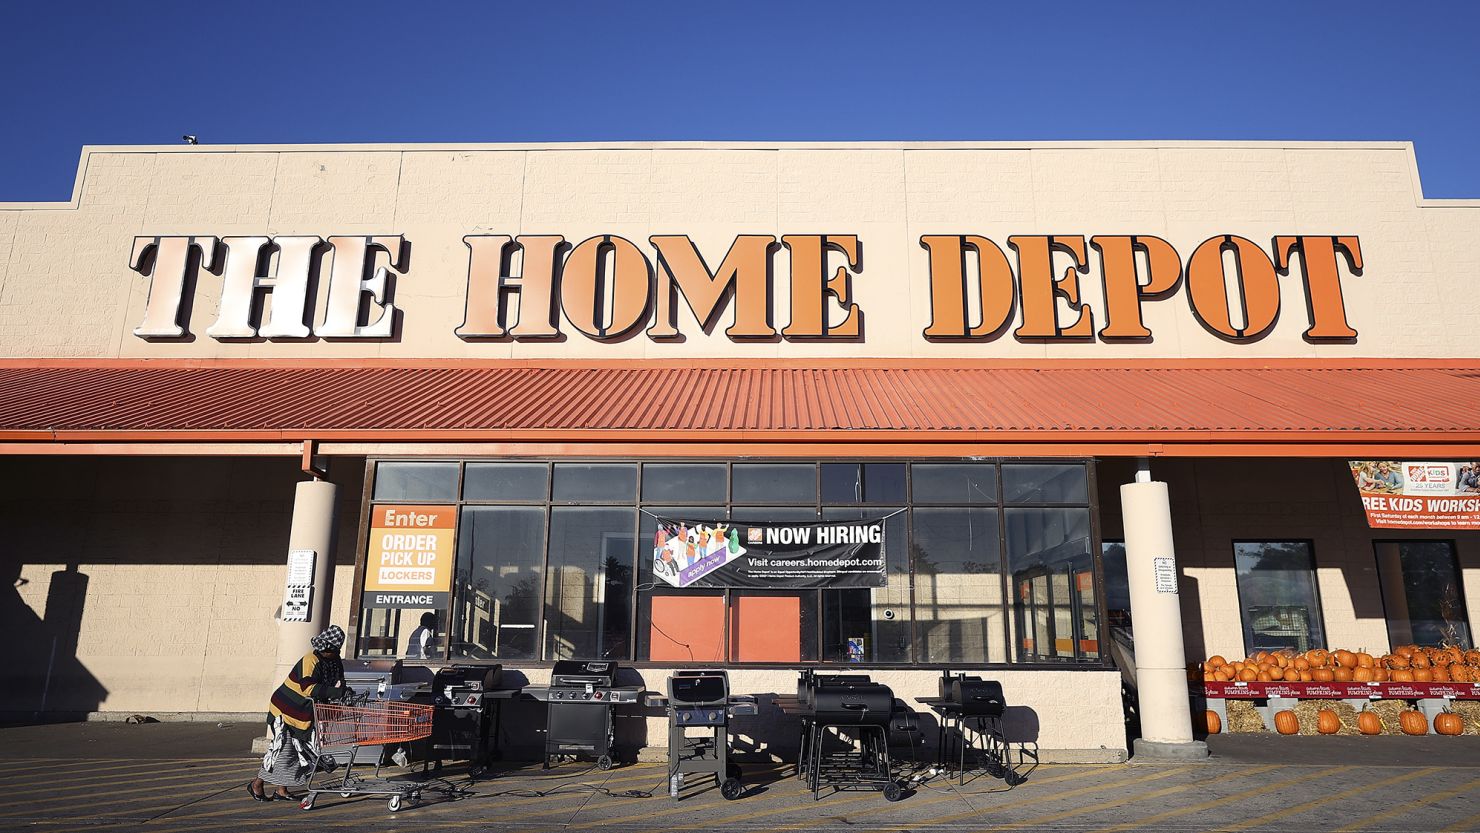 A general view of the Home Depot branch on September 23, 2022 in Philadelphia, Pennsylvania. (Photo by Tim Nwachukwu/Getty Images)